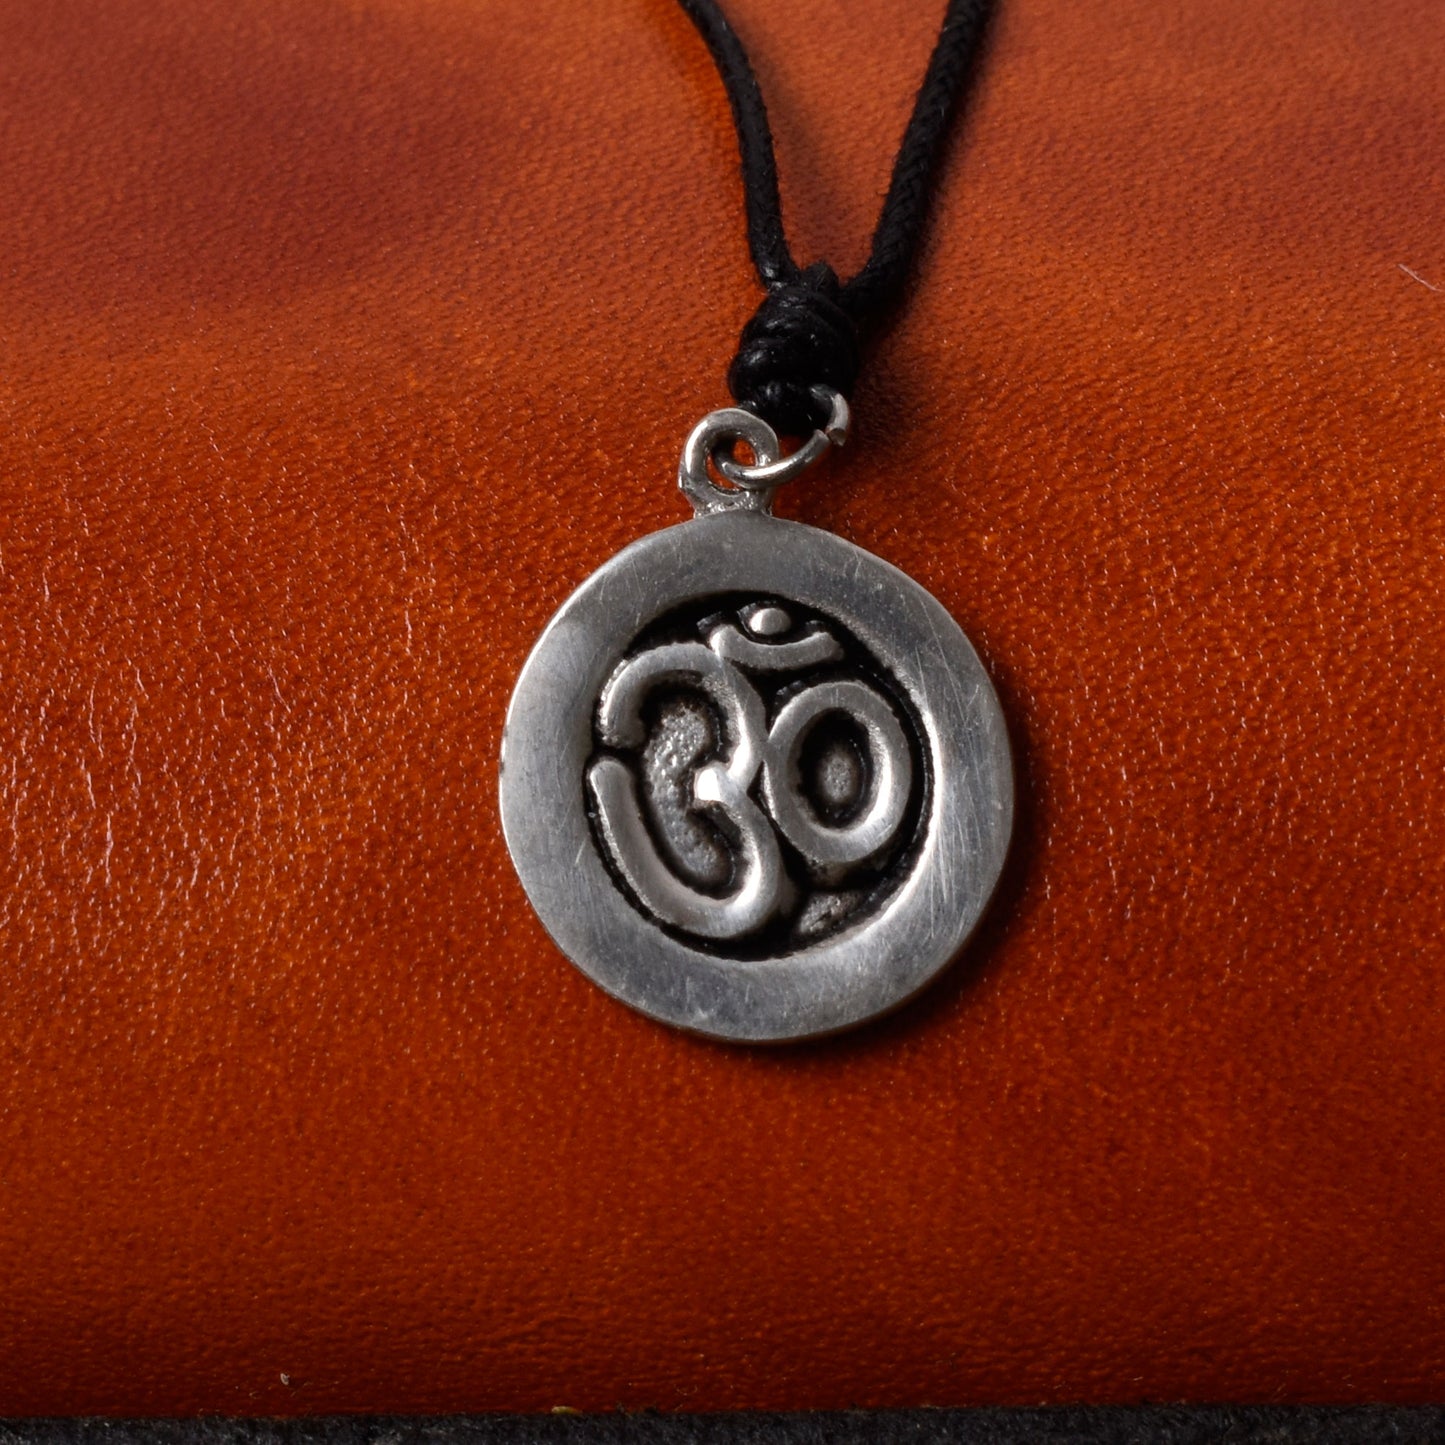 Stylish Om Hindu Word Silver Pewter Charm Necklace Pendant Jewelry